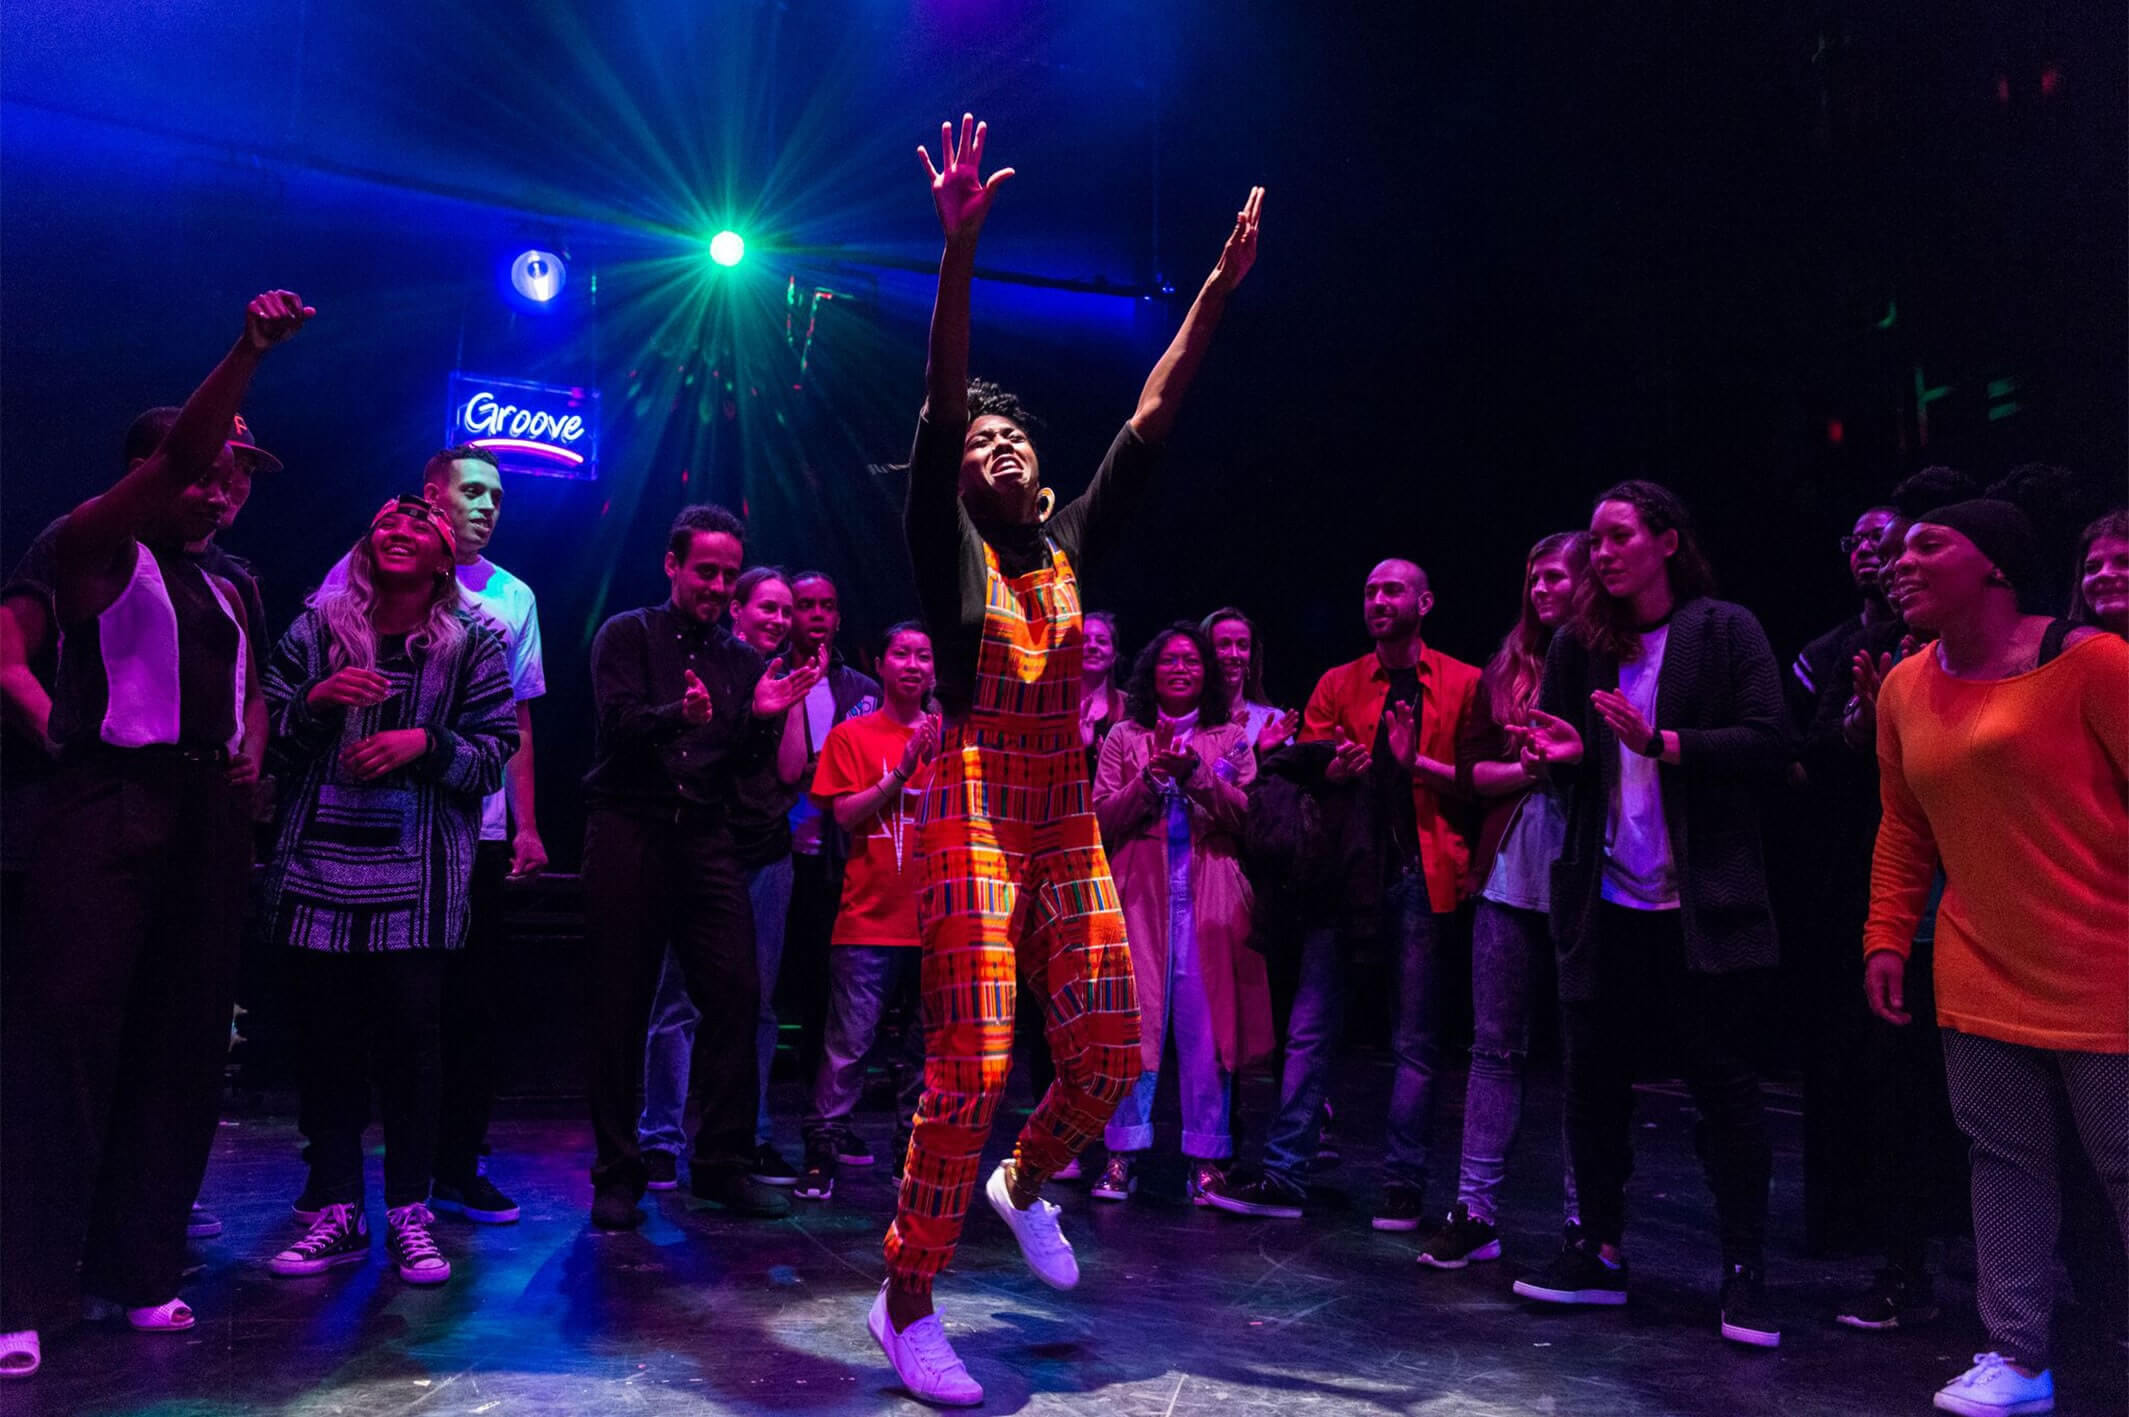 An African British female wearing orange dungarees with colourful rectangular patterns windmills her arms powerfully on the dance floor, the crowd that surround her clap their hands.